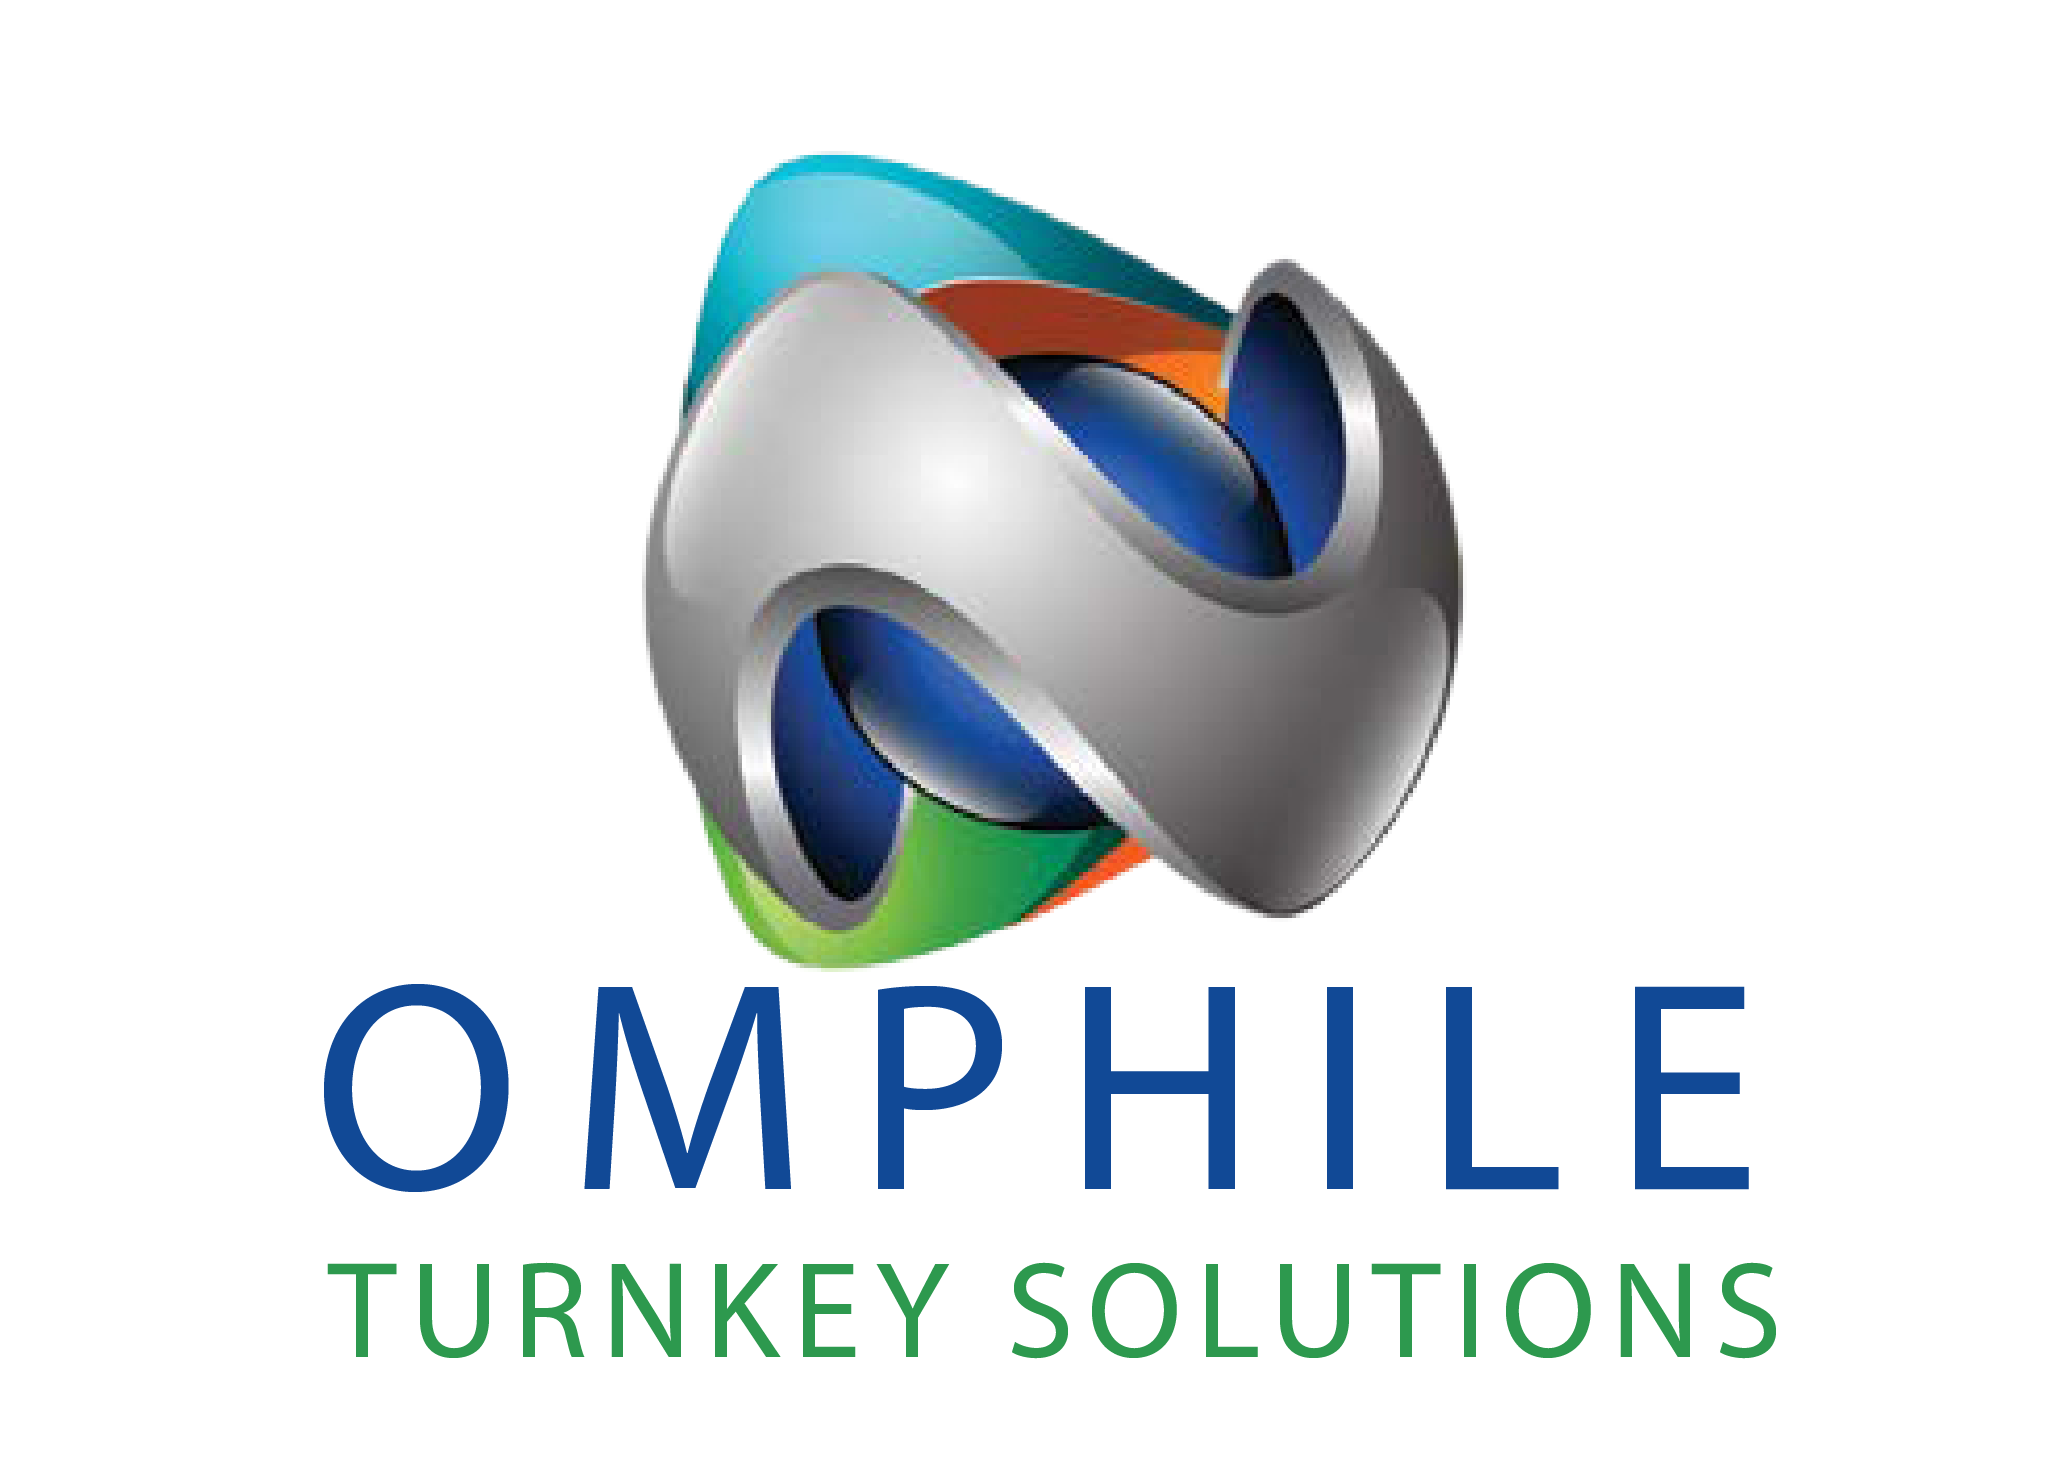 OMPHILE TURNKEY SOLUTIONS